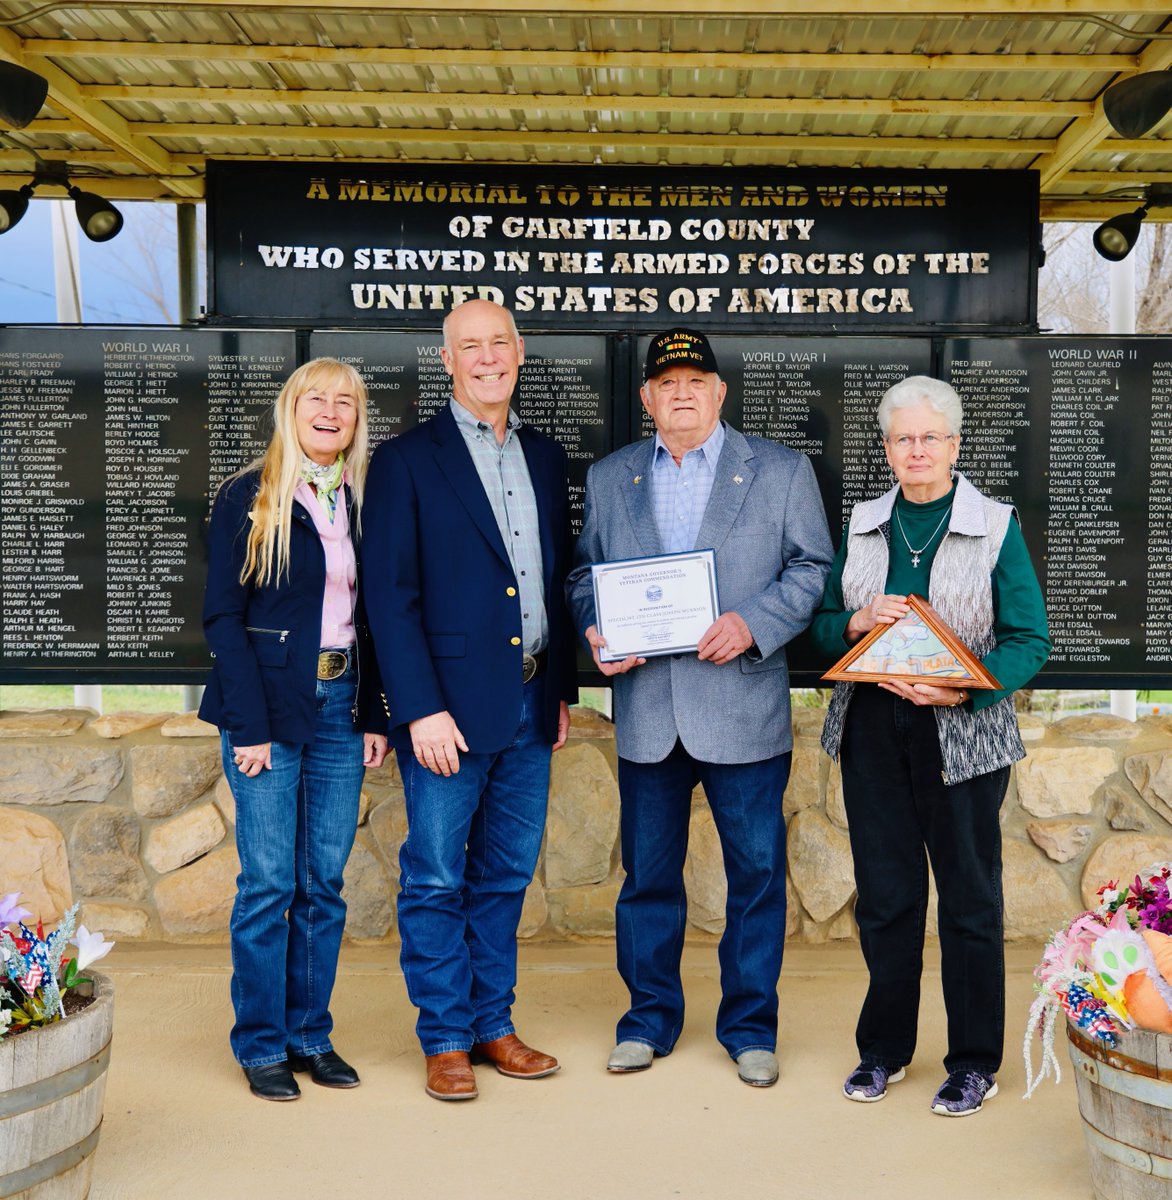 As Americans, we have a duty to honor our veterans. This week, during my 56 County Tour, I had the privilege of awarding the Montana Governor’s Veteran Commendation to two remarkable individuals. Their sacrifice and service inspire us all.